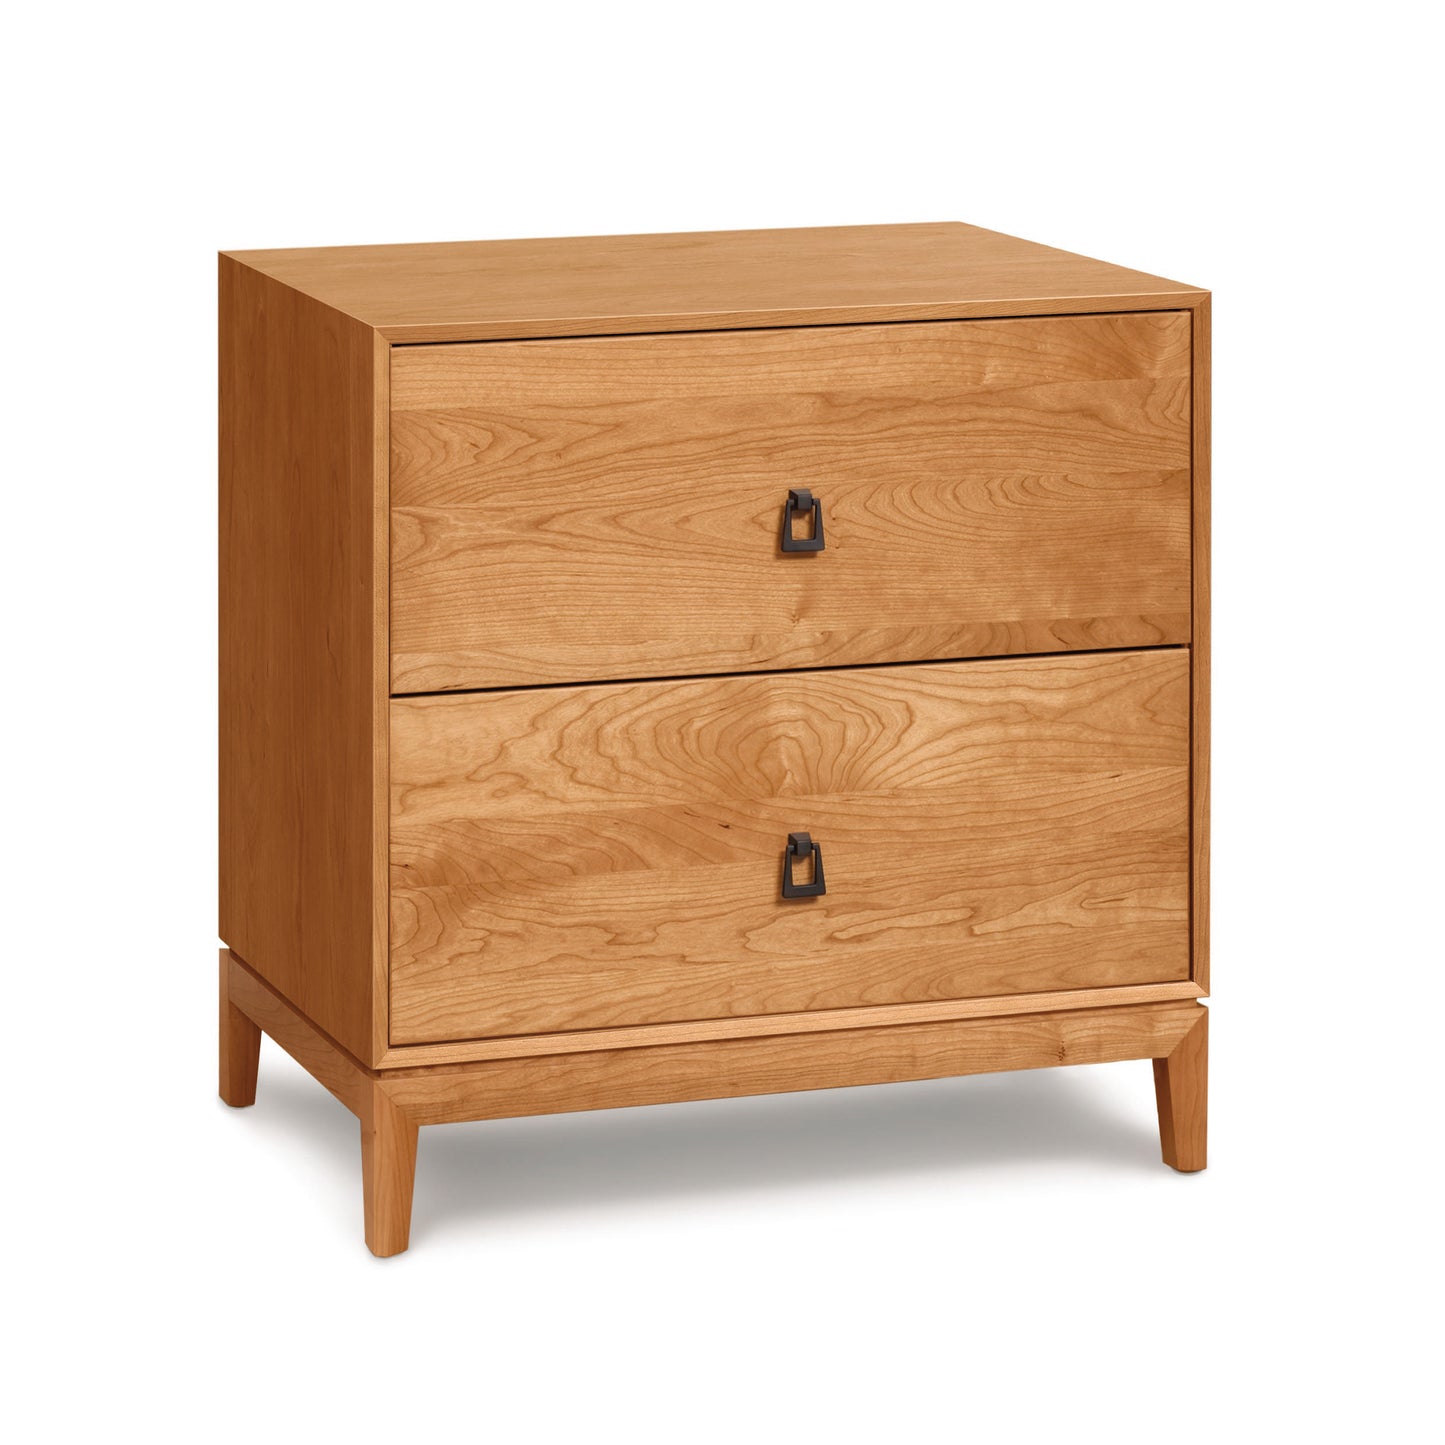 A black bronze ring pulls enhance the stunning appearance of the Mansfield 2-Drawer Nightstand by Copeland Furniture, complementing its mitered frame. Inspired by American craftsman design, this piece is both functional.